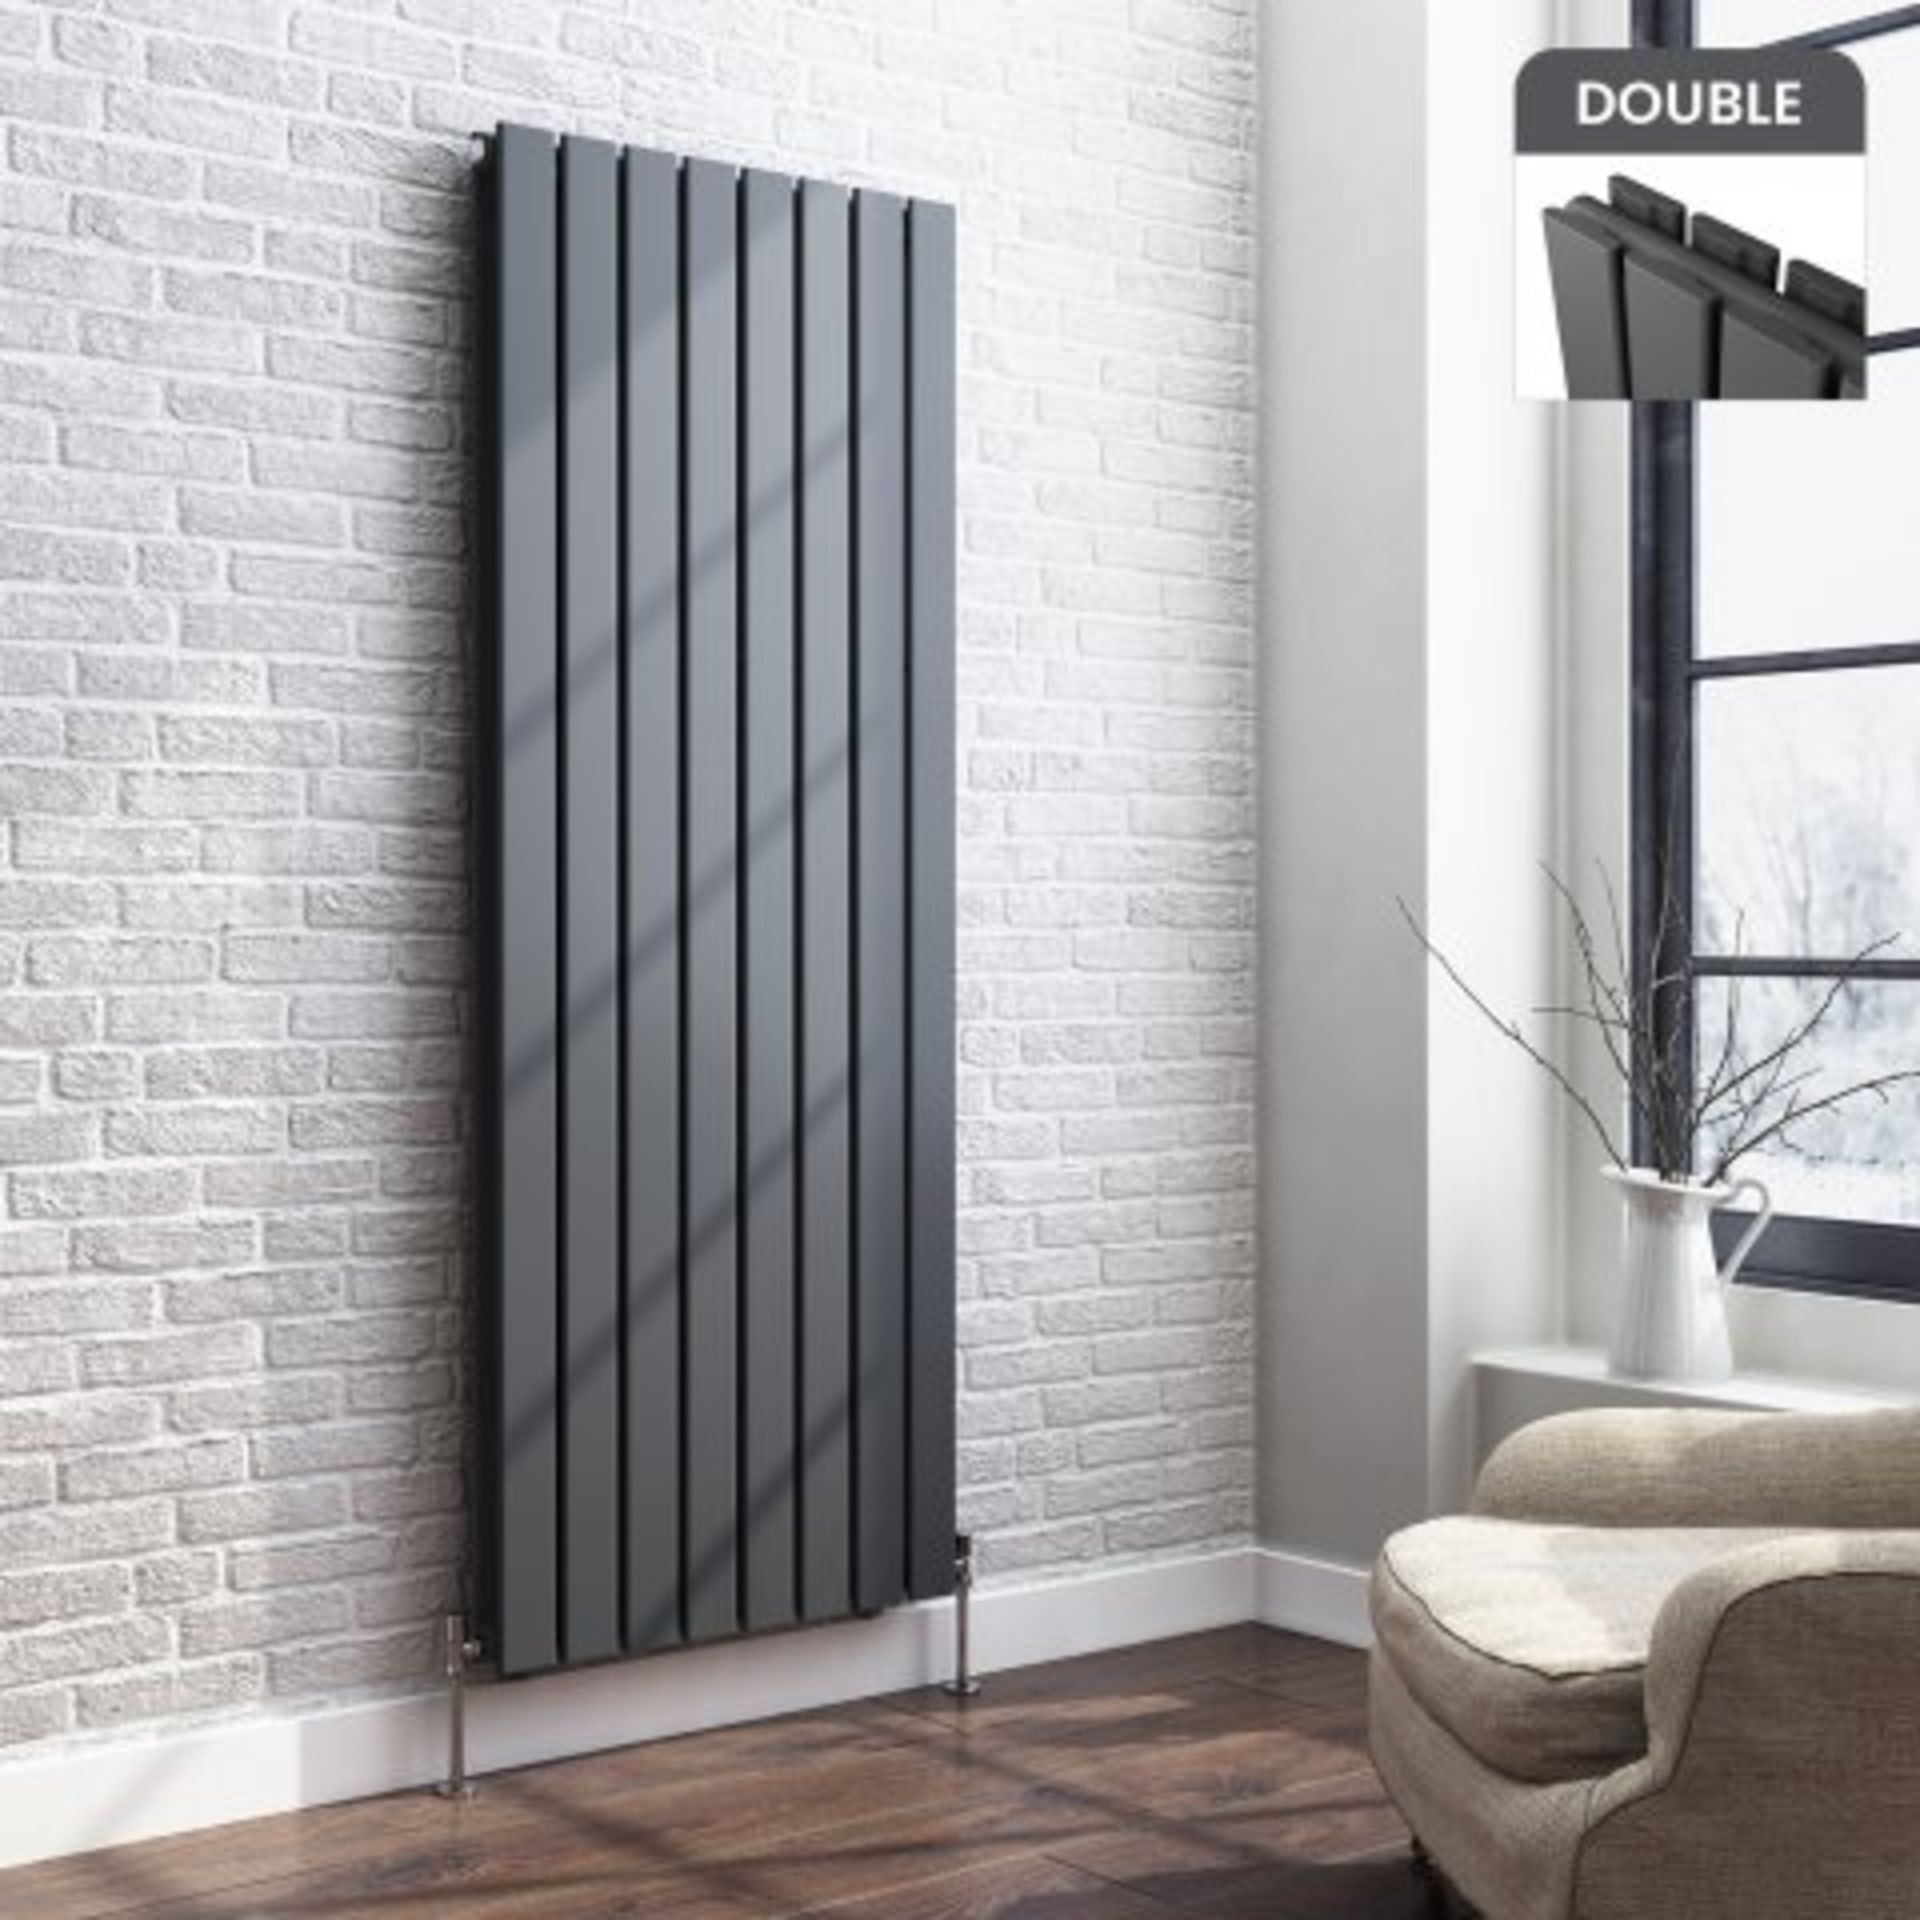 (O199) 1600x608mm Anthracite Double Flat Panel Vertical Radiator. RRP £599.99. Designer Touch